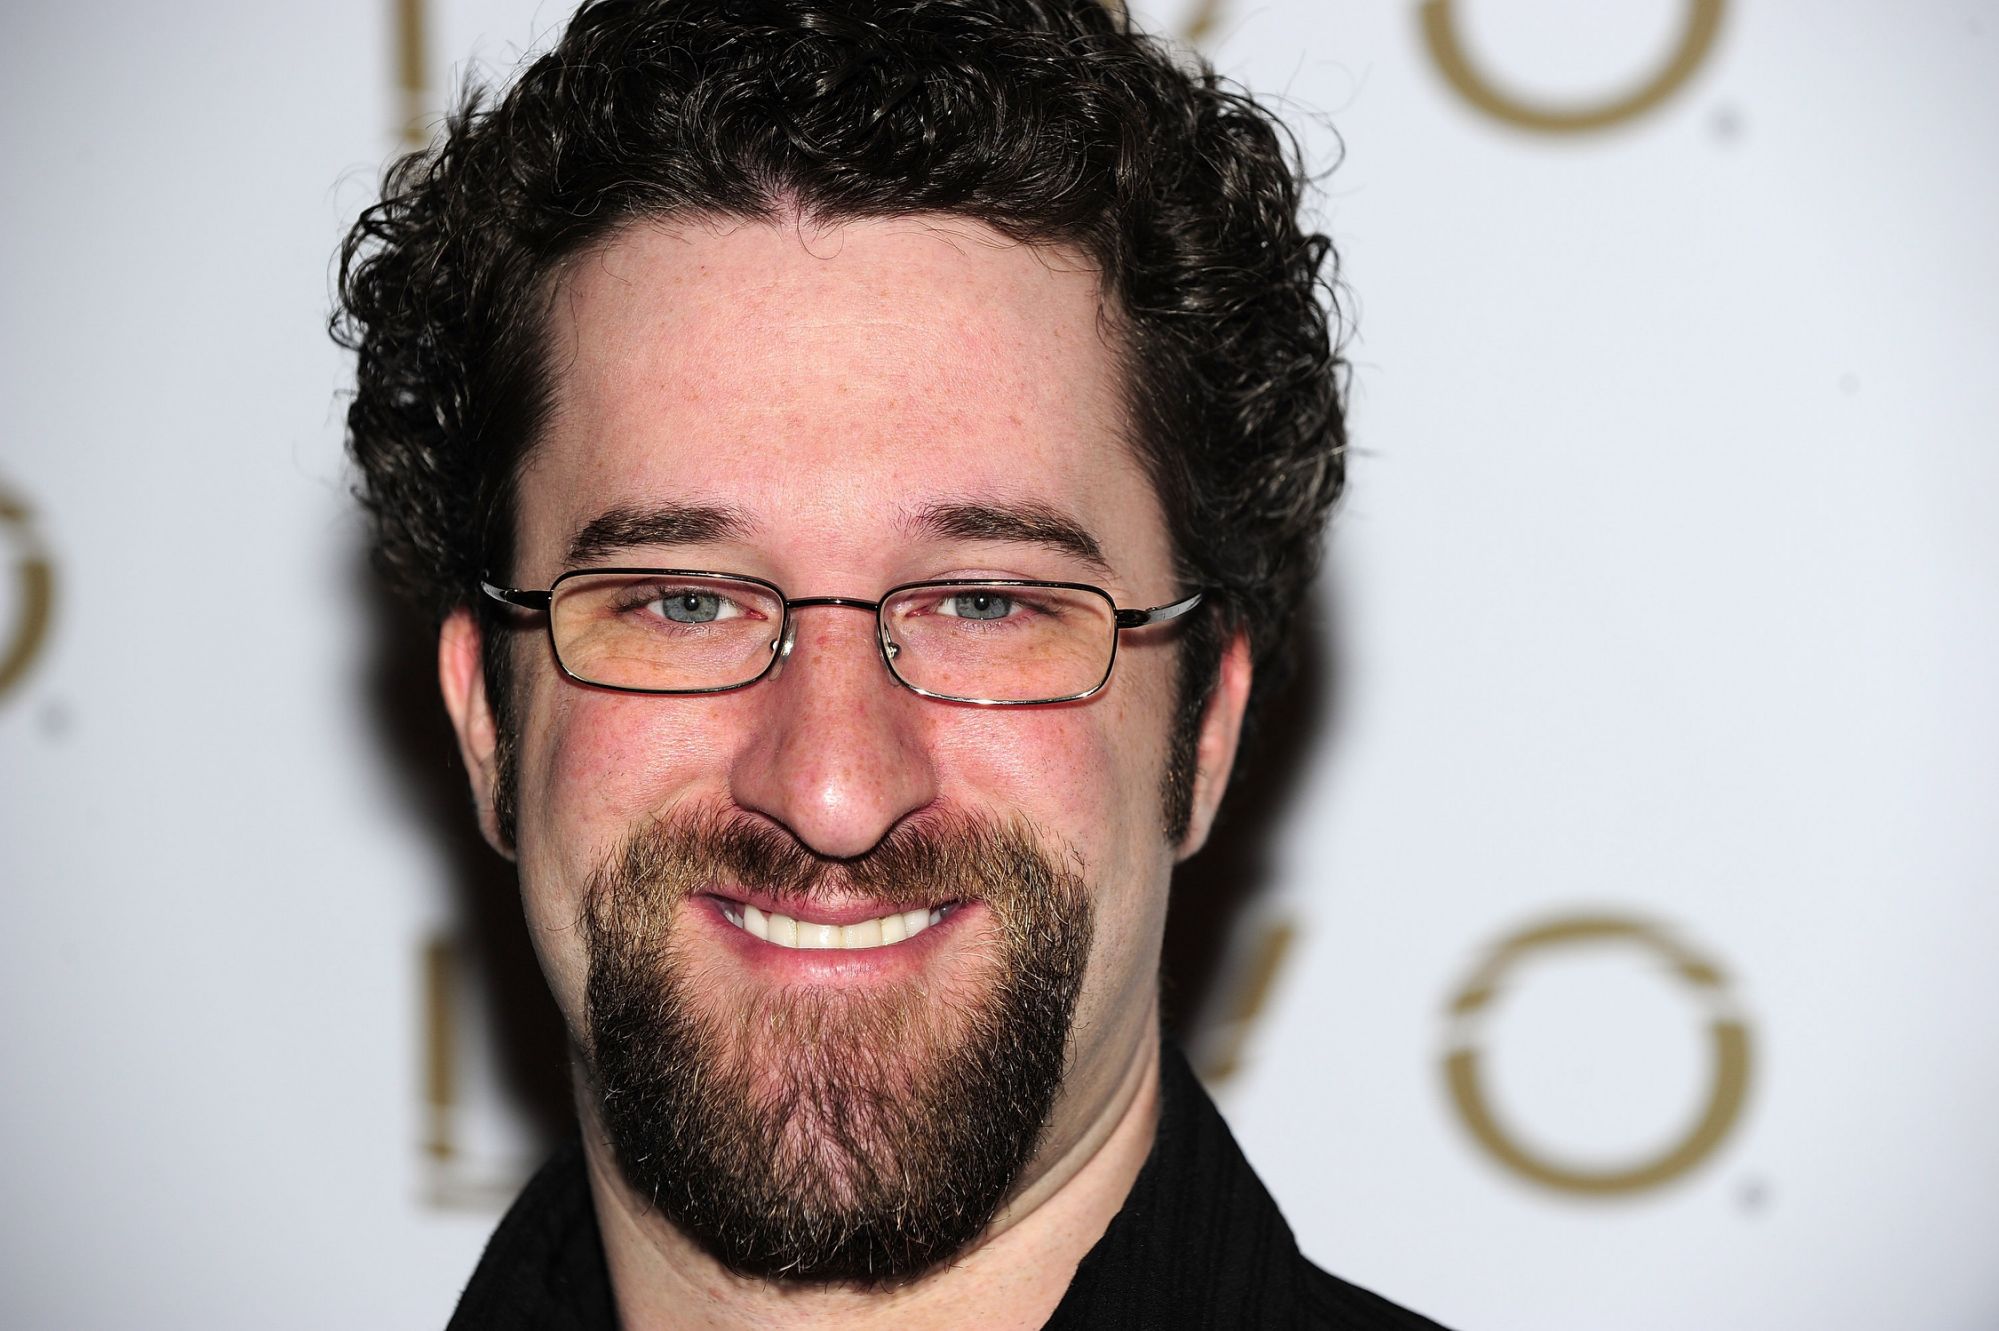 Dustin Diamond, star of "Saved by the Bell," is still in the hospital